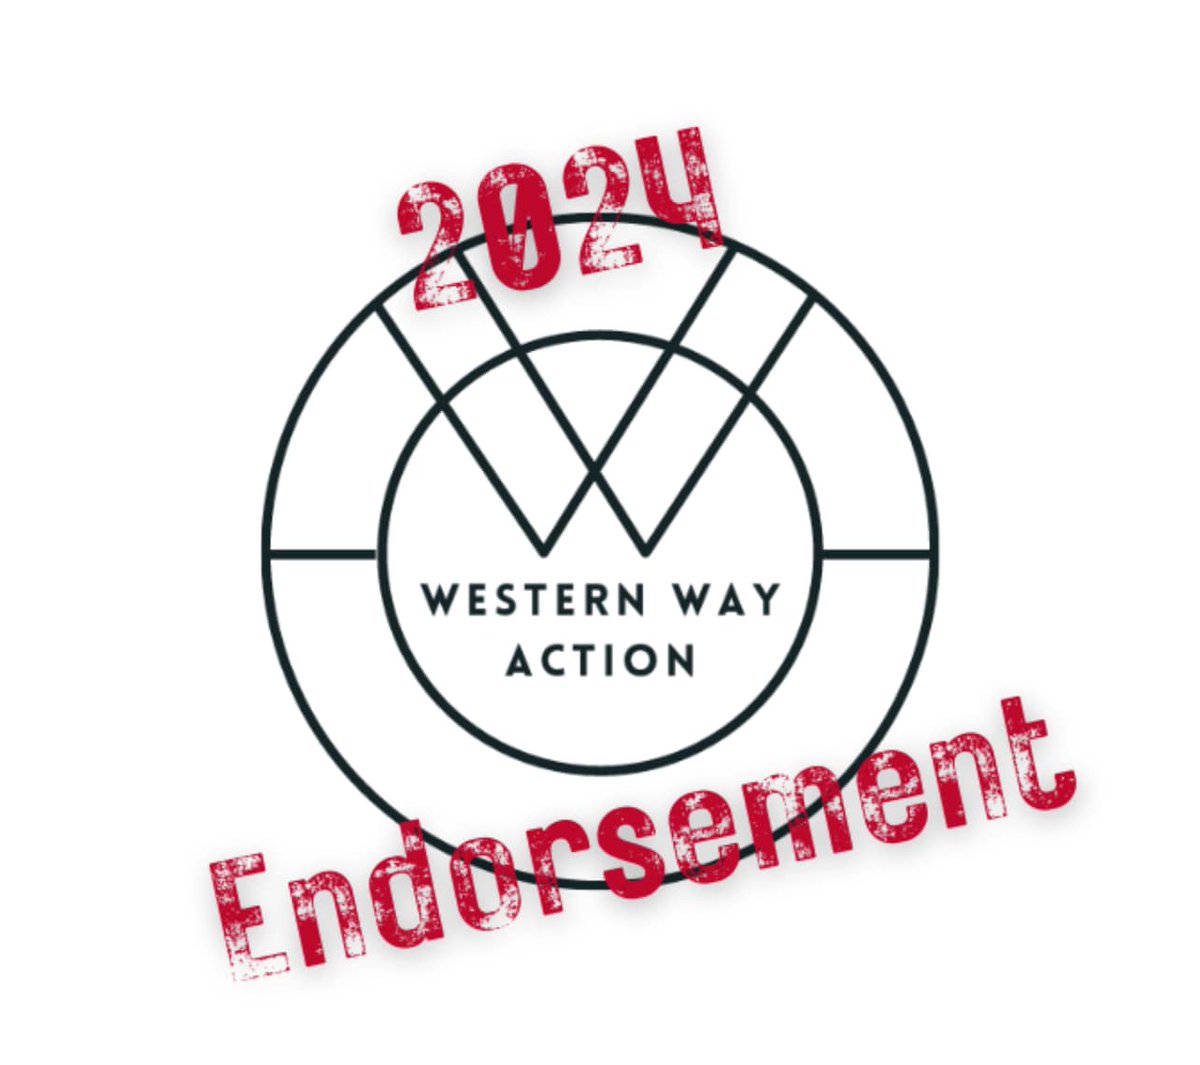 I am very grateful for this endorsement!
“Dear Assemblyman Koenig,
We're thrilled to announce that your campaign has earned the endorsement of Western Way Action!' #nvleg #AD38